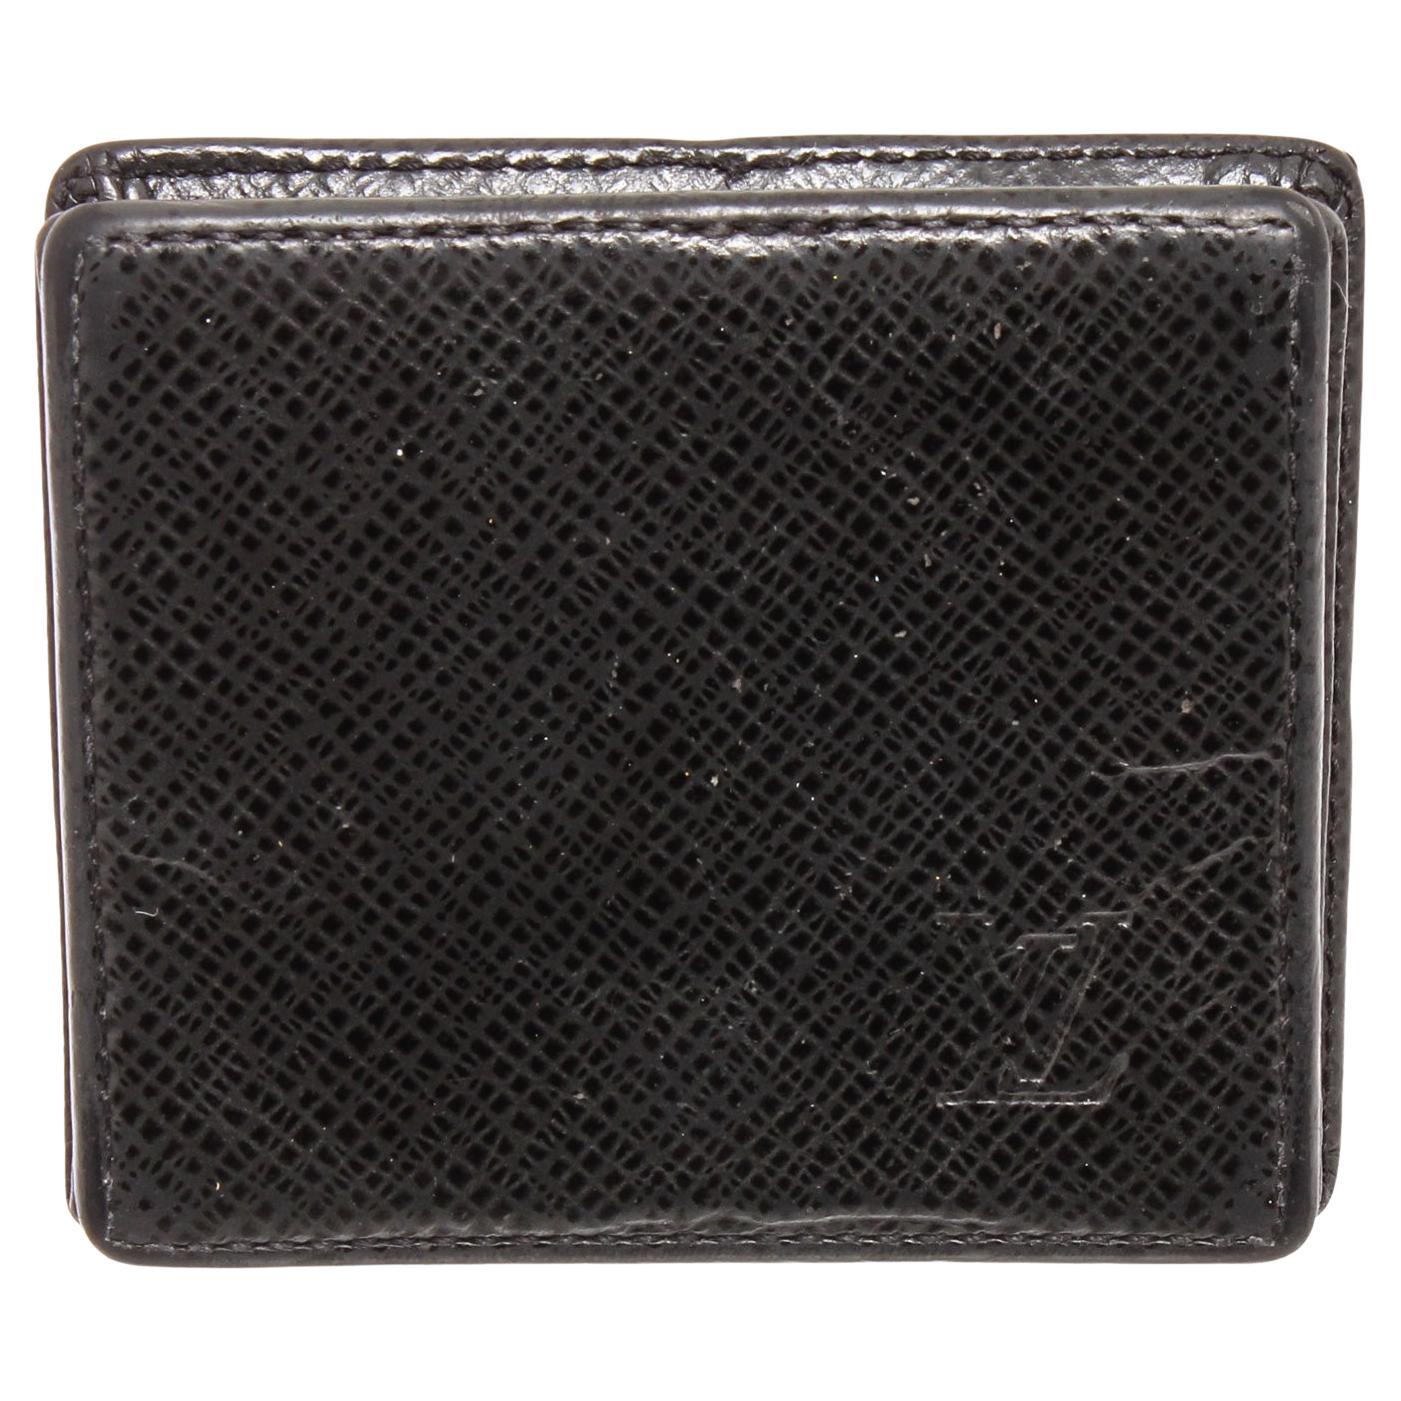 Louis Vuitton black Taiga leather square coin case with silver-tone hardware